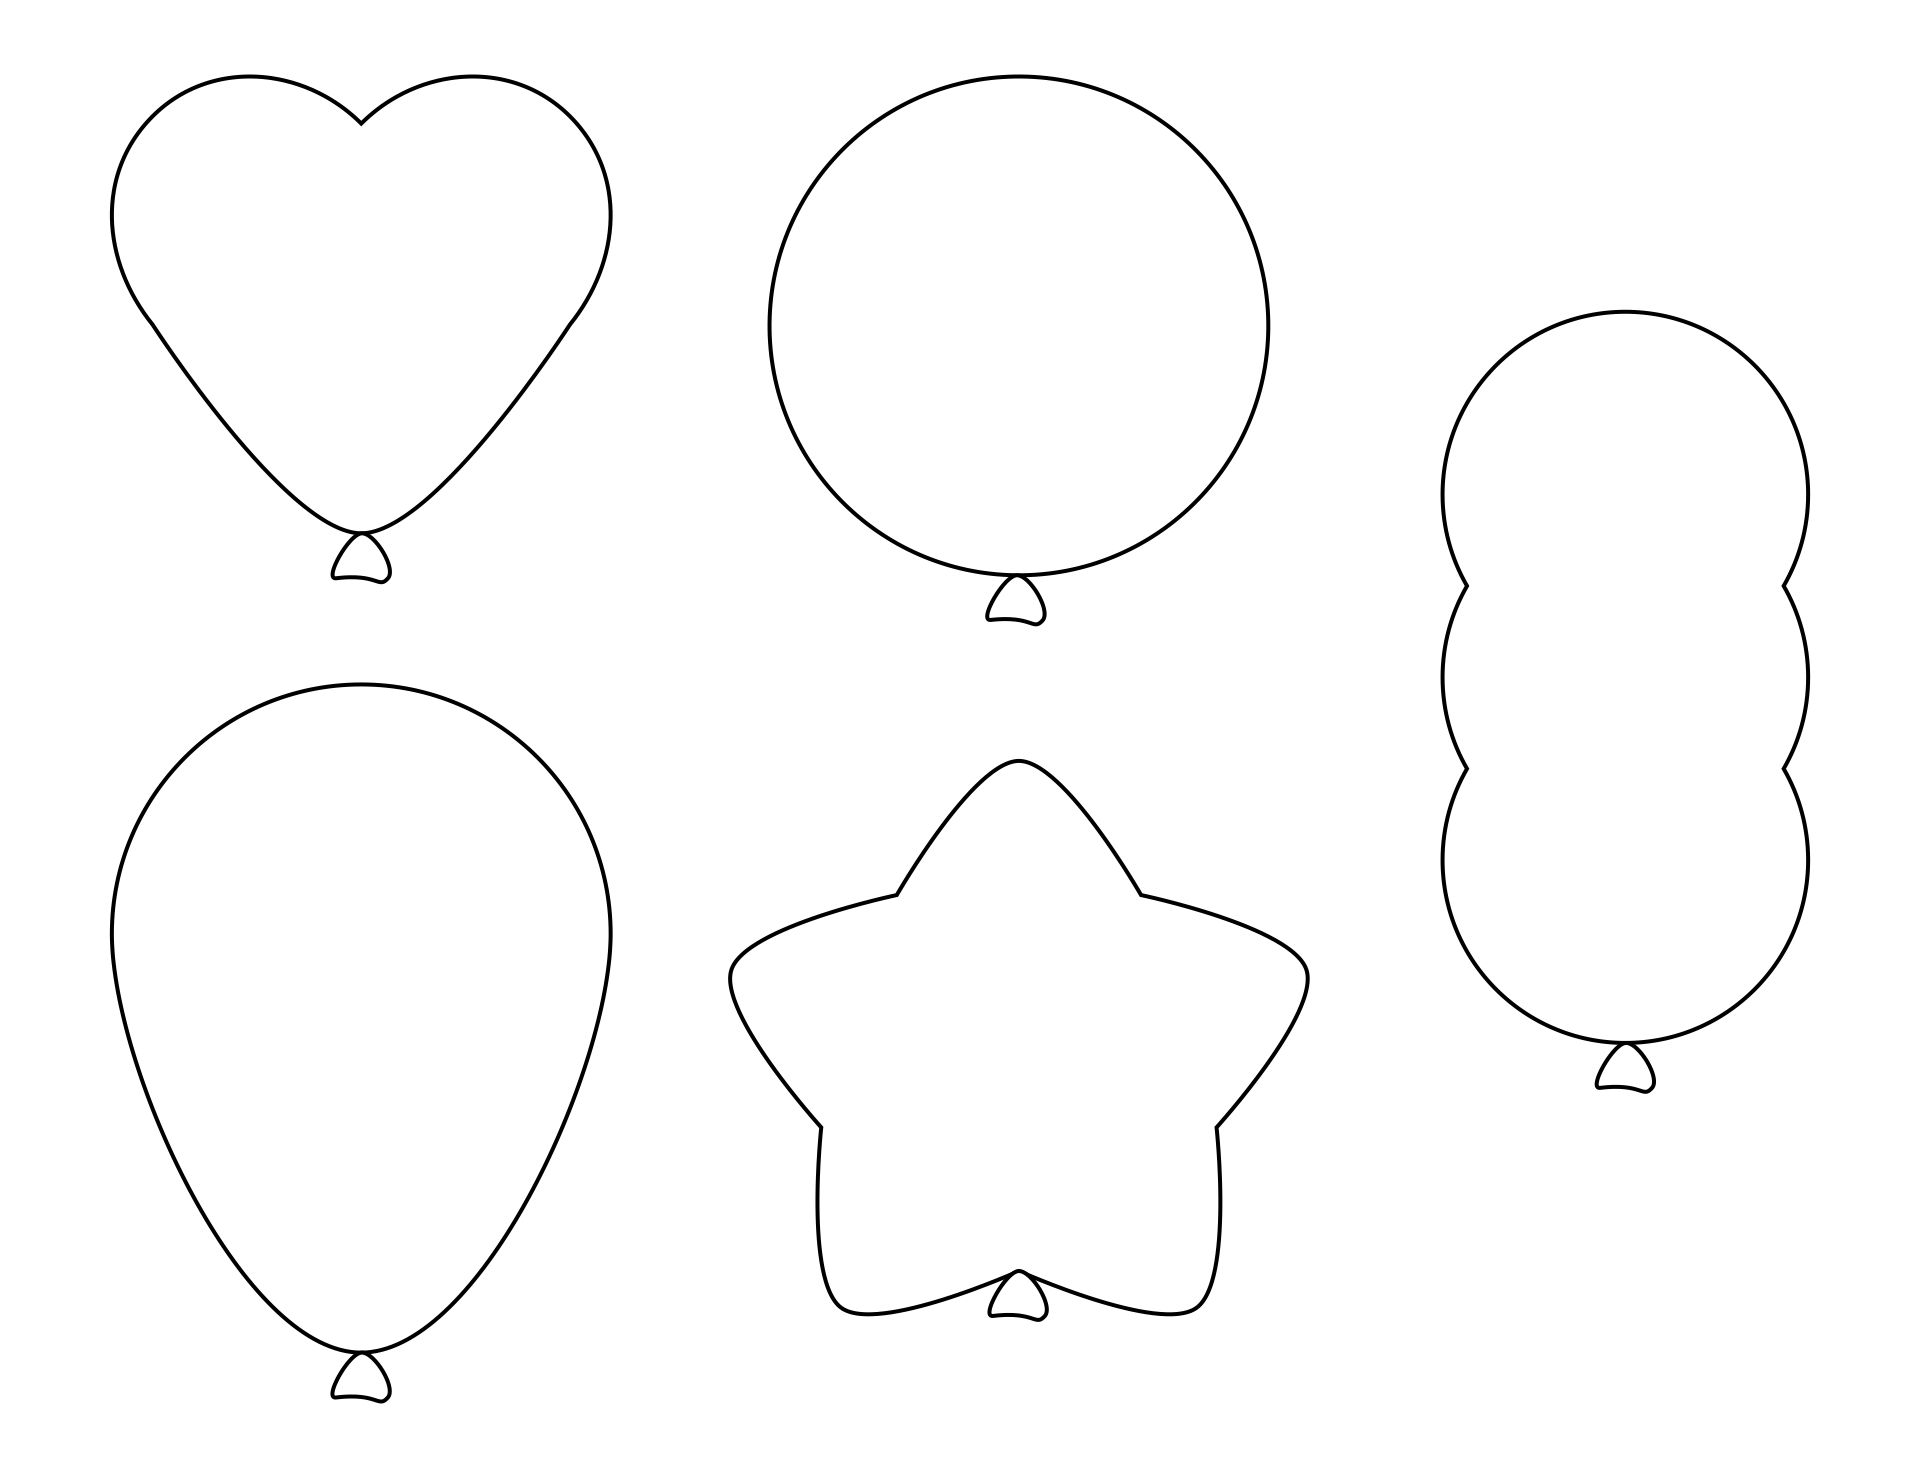 7 Best Images of Balloon Outline Printable Balloon Cut Out Template